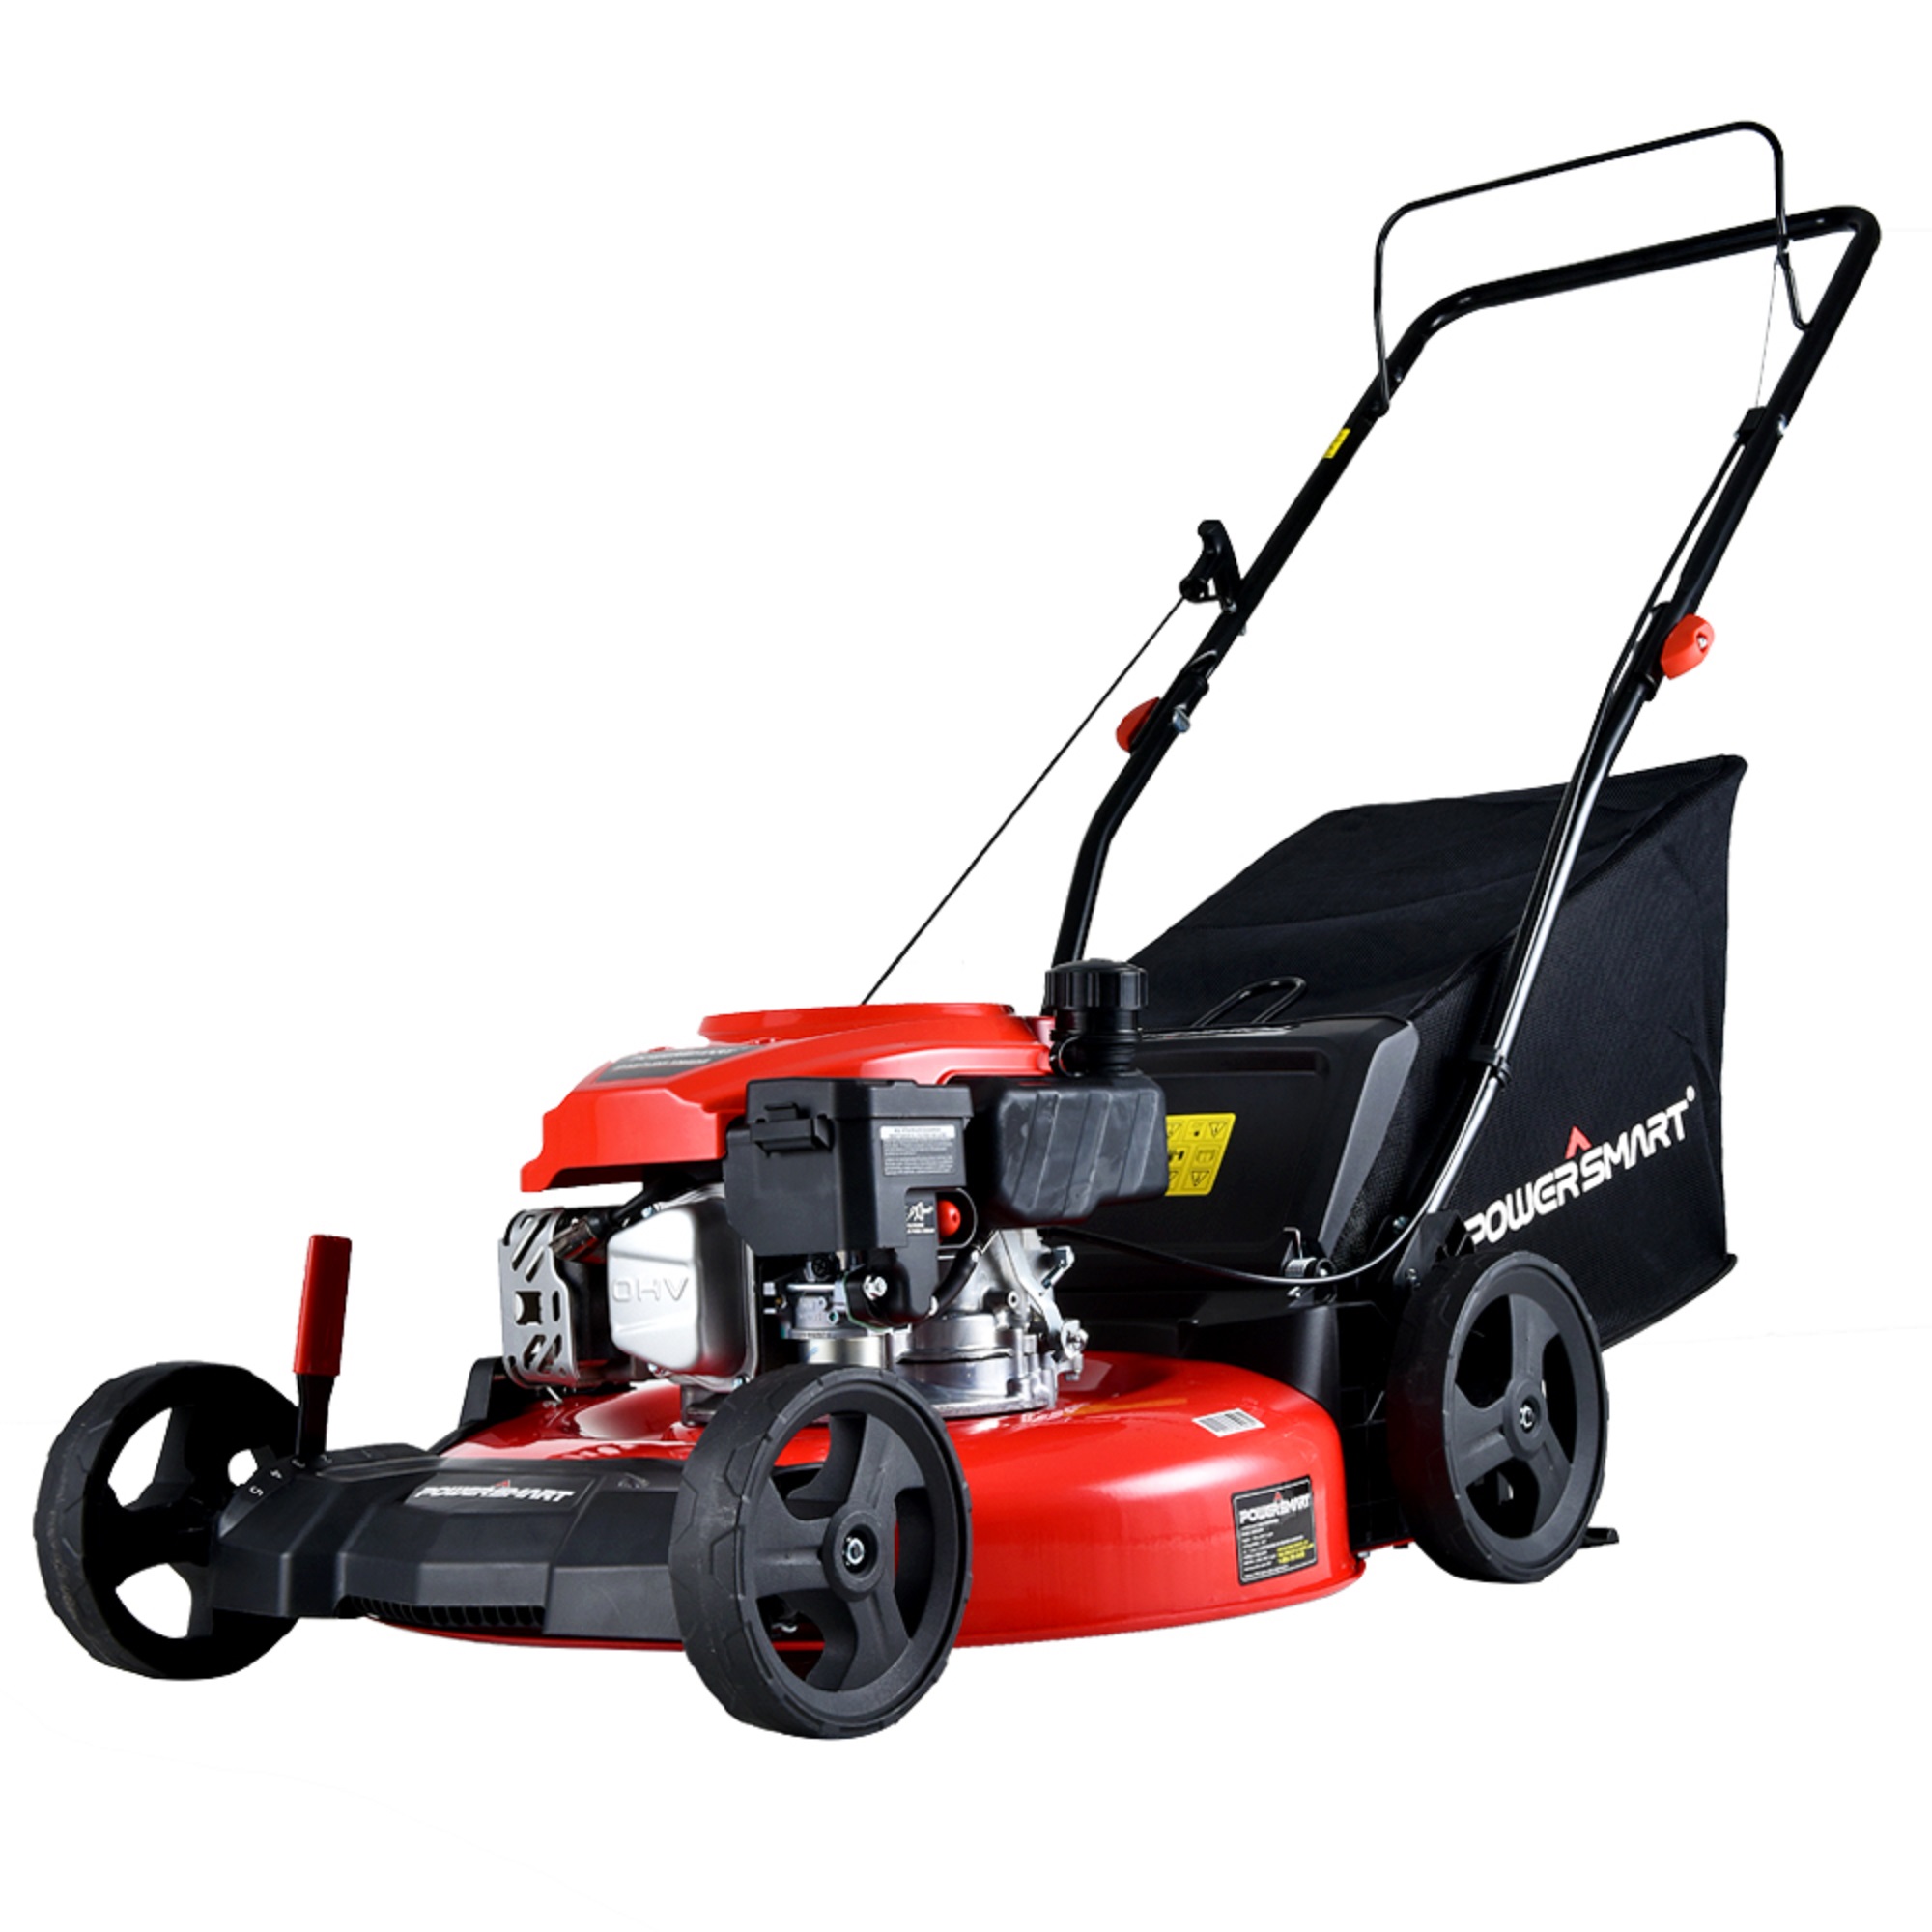 PowerSmart DB2194PR 21" 3-in-1 Gas Push Lawn Mower 170cc with Steel Deck - image 2 of 9